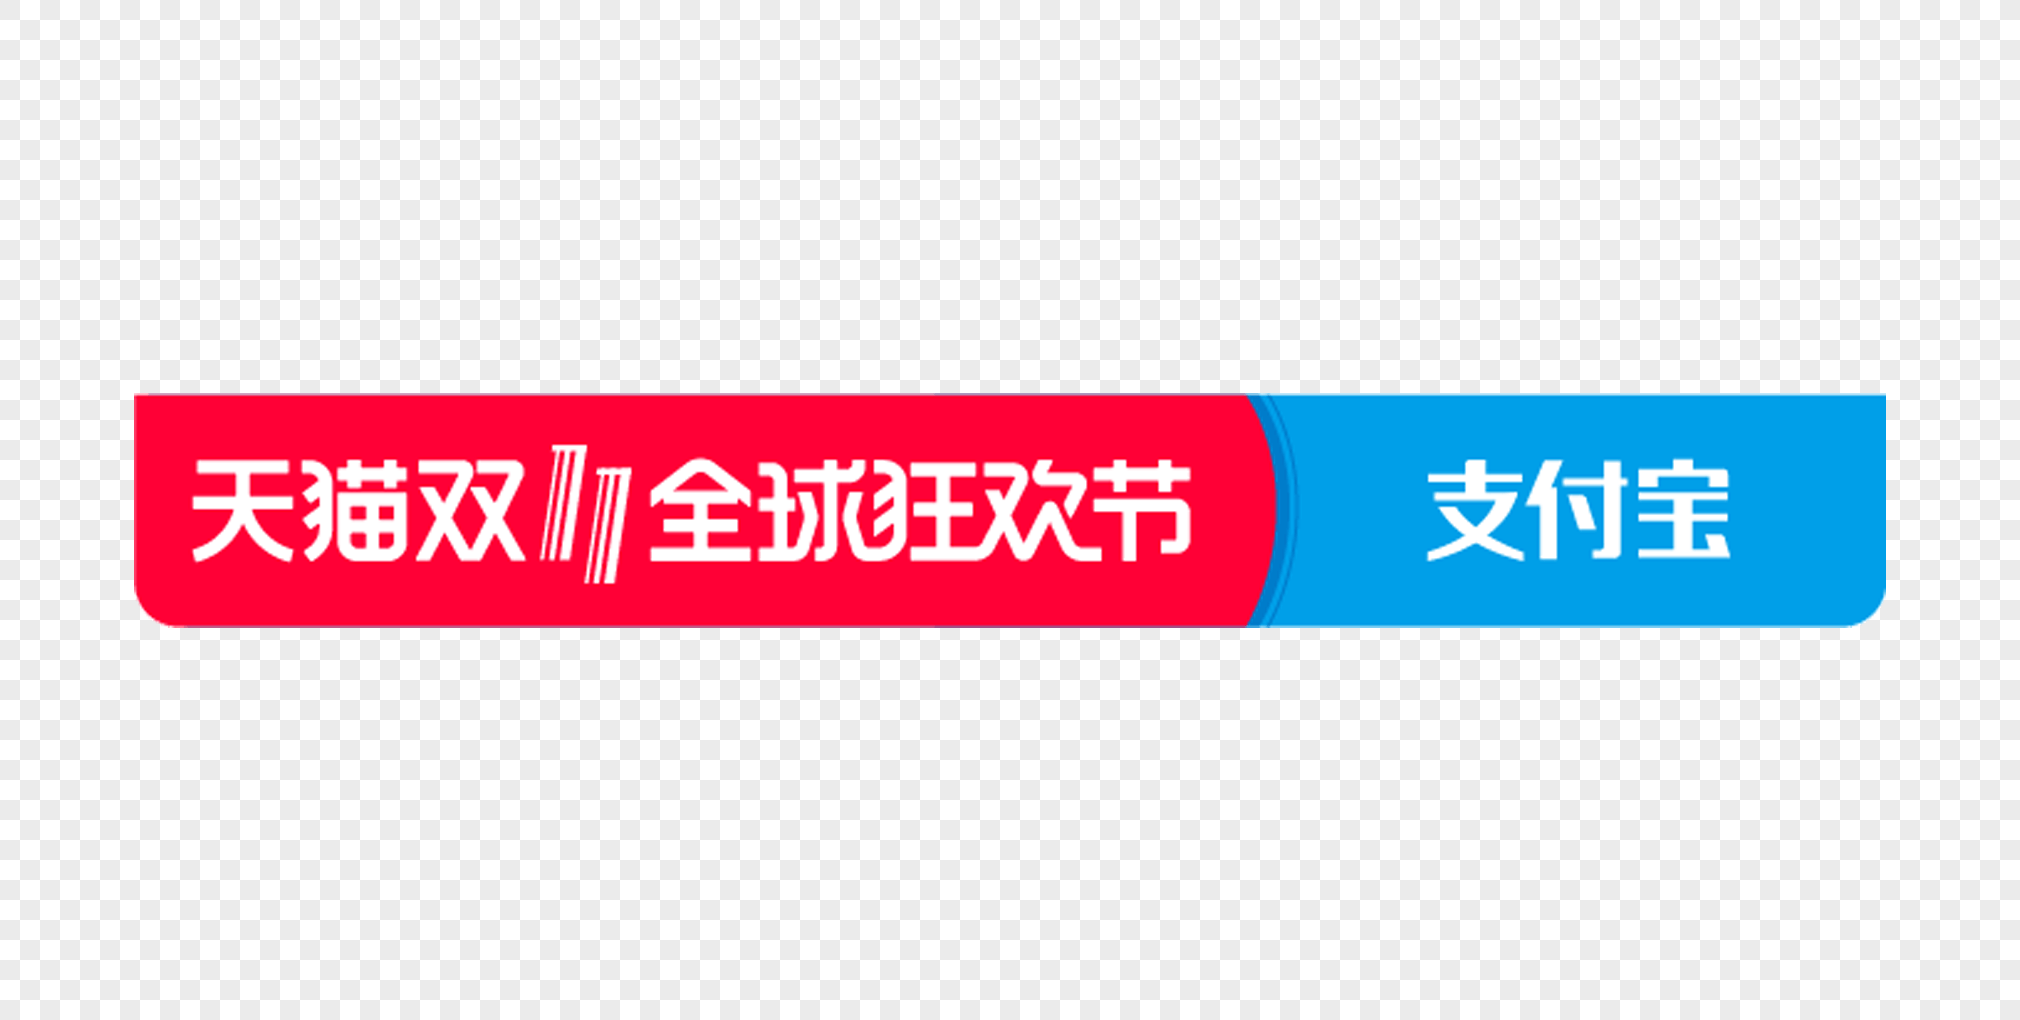 Tmall Logo - double 11 tmall logo png image_picture free download